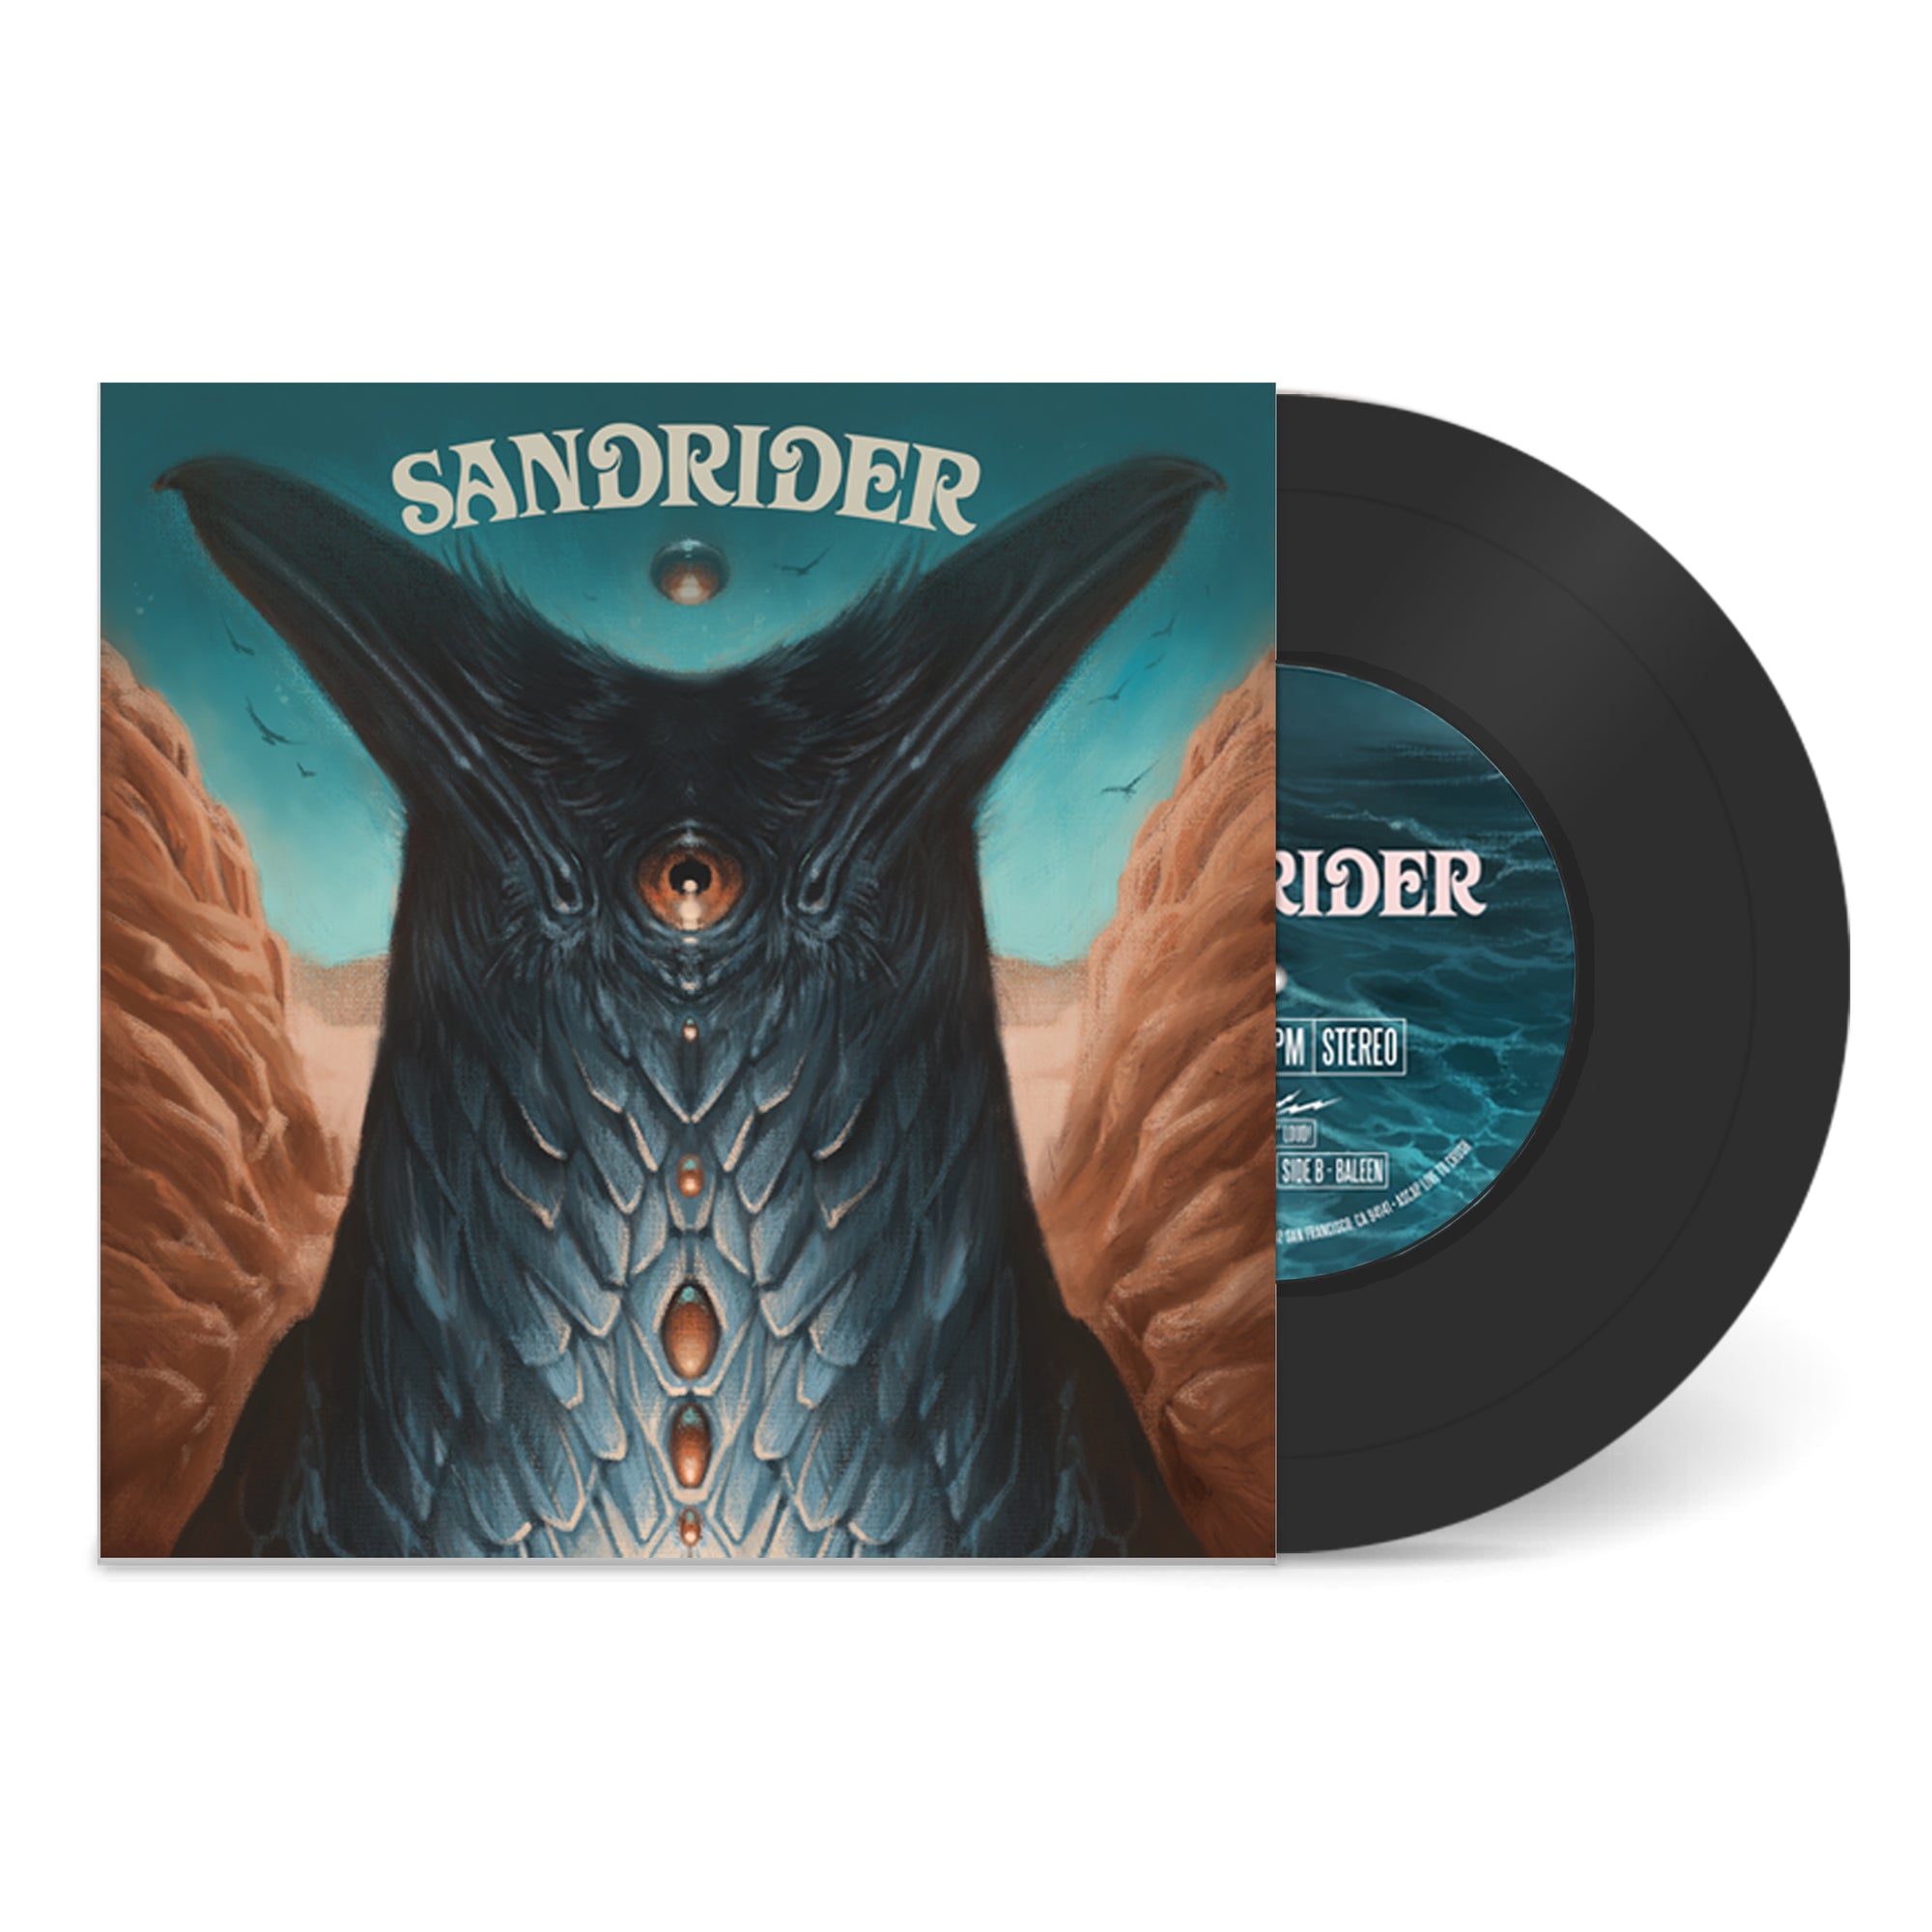 SANDRIDER "AVIARY/BALEEN" 7" OUT NOW